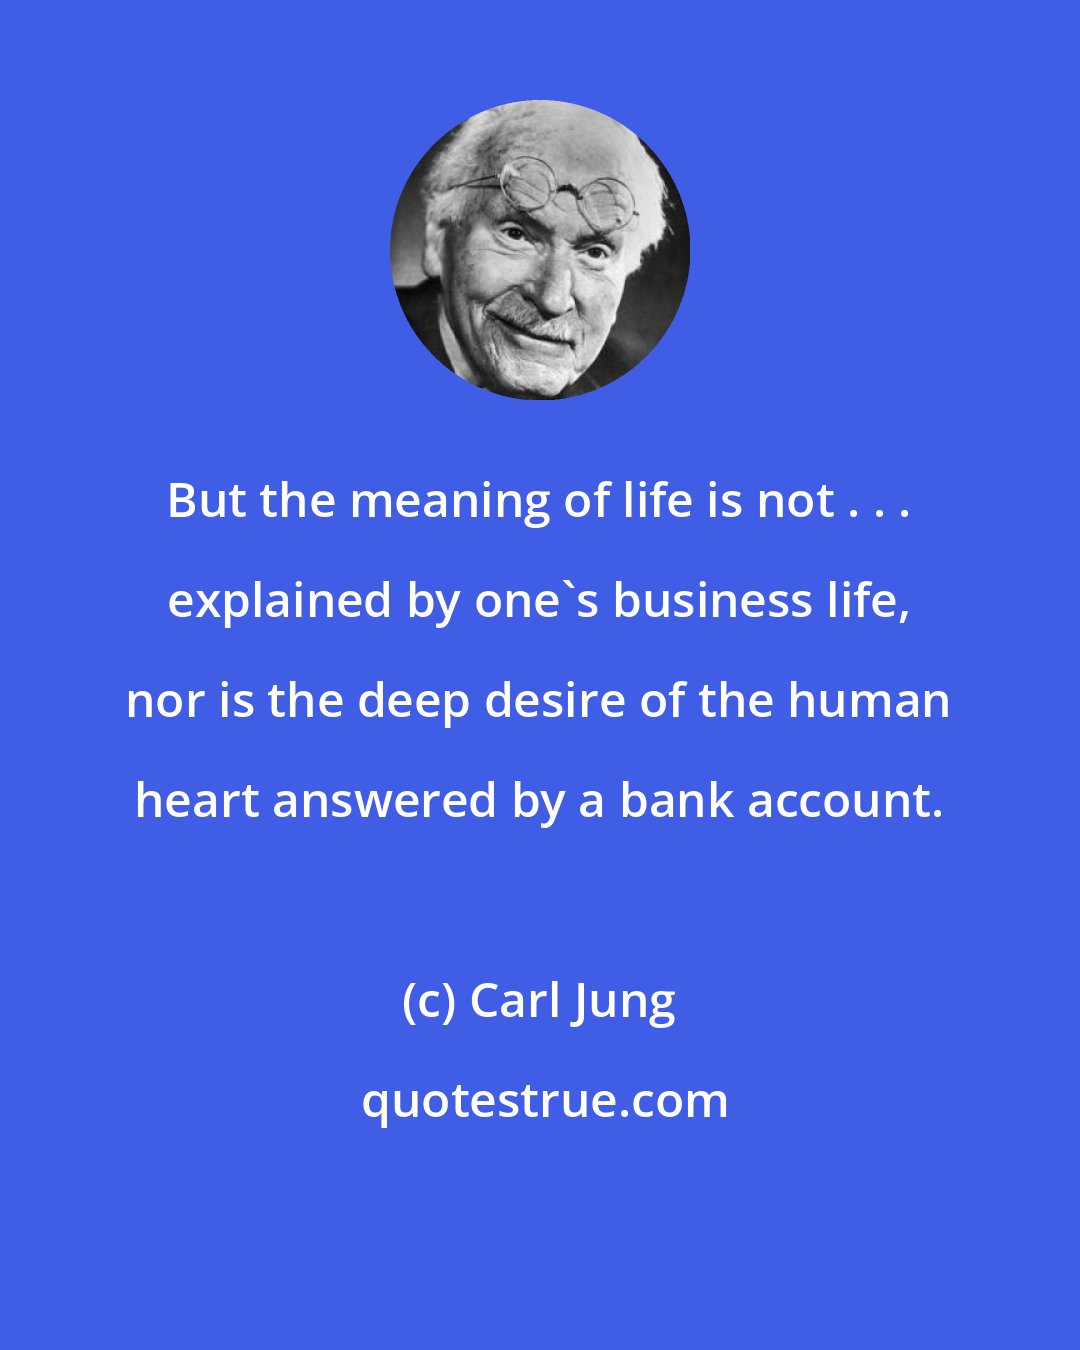 Carl Jung: But the meaning of life is not . . . explained by one's business life, nor is the deep desire of the human heart answered by a bank account.